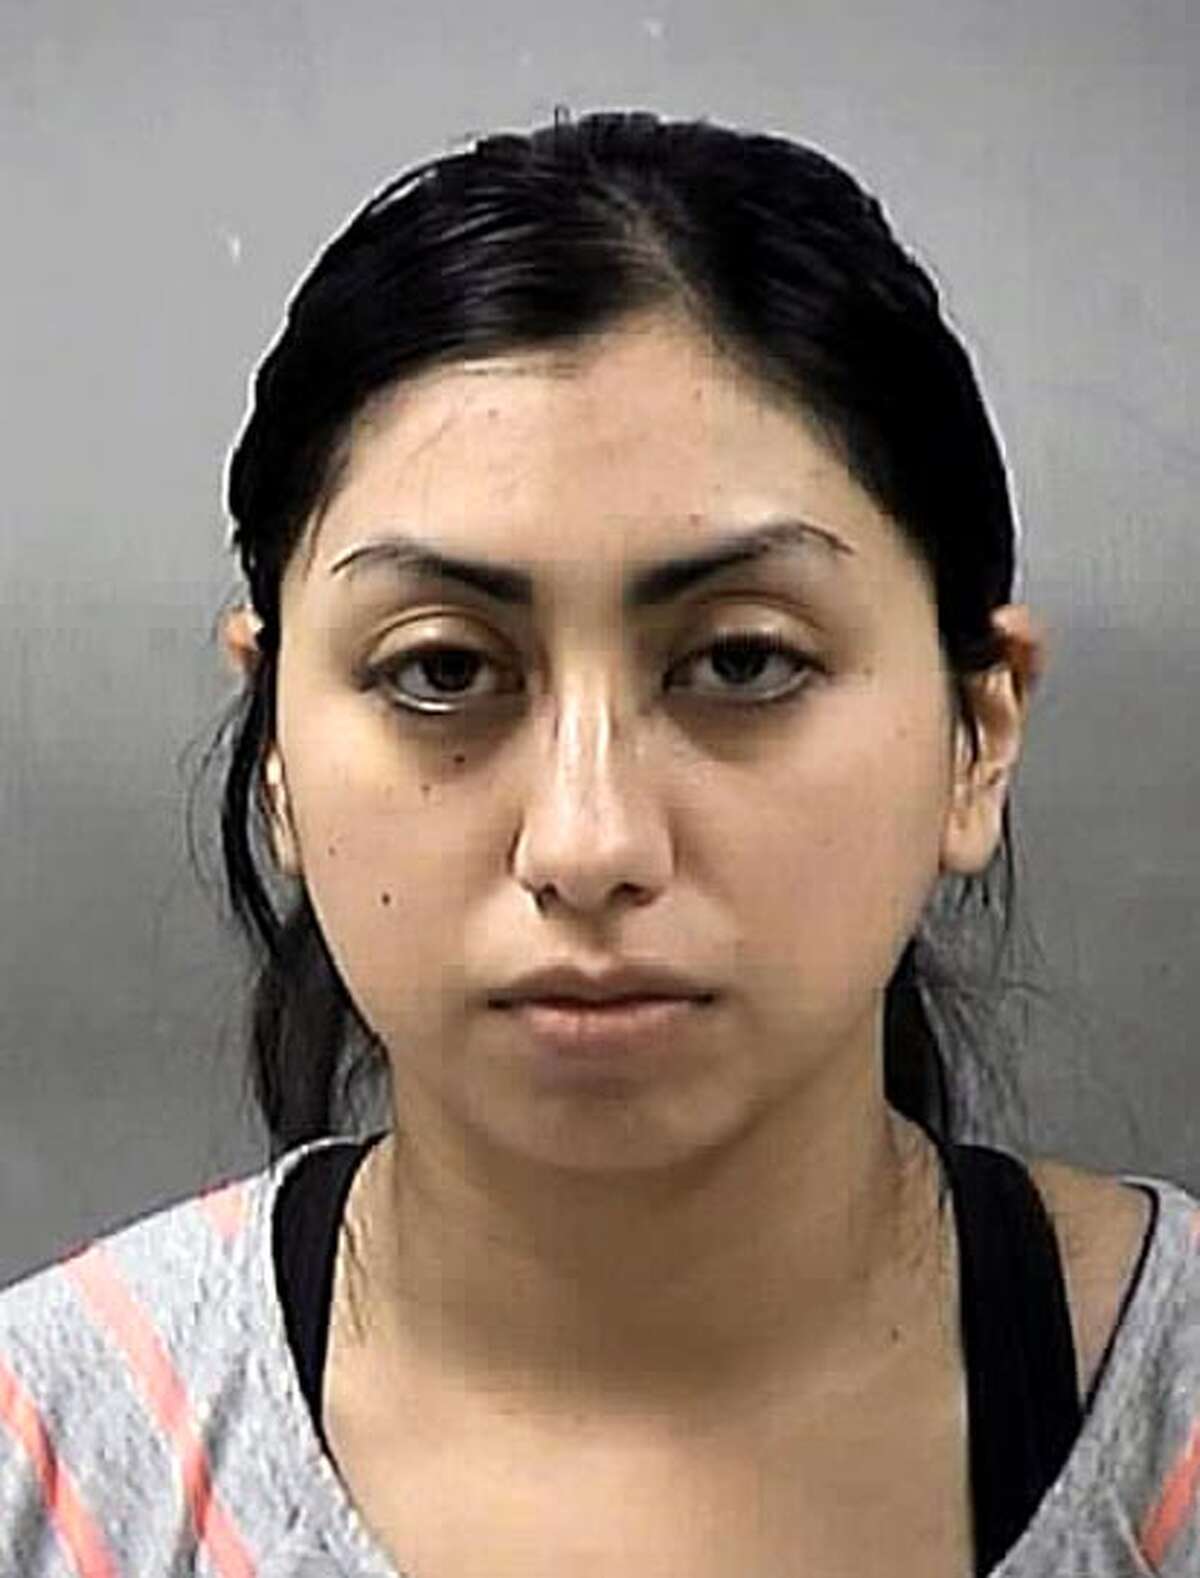 Jefferson High School dance coach Destini Michelle Munoz, 25, is free on bail after she was arrested on allegations she had a relationship with a male student, officials said.